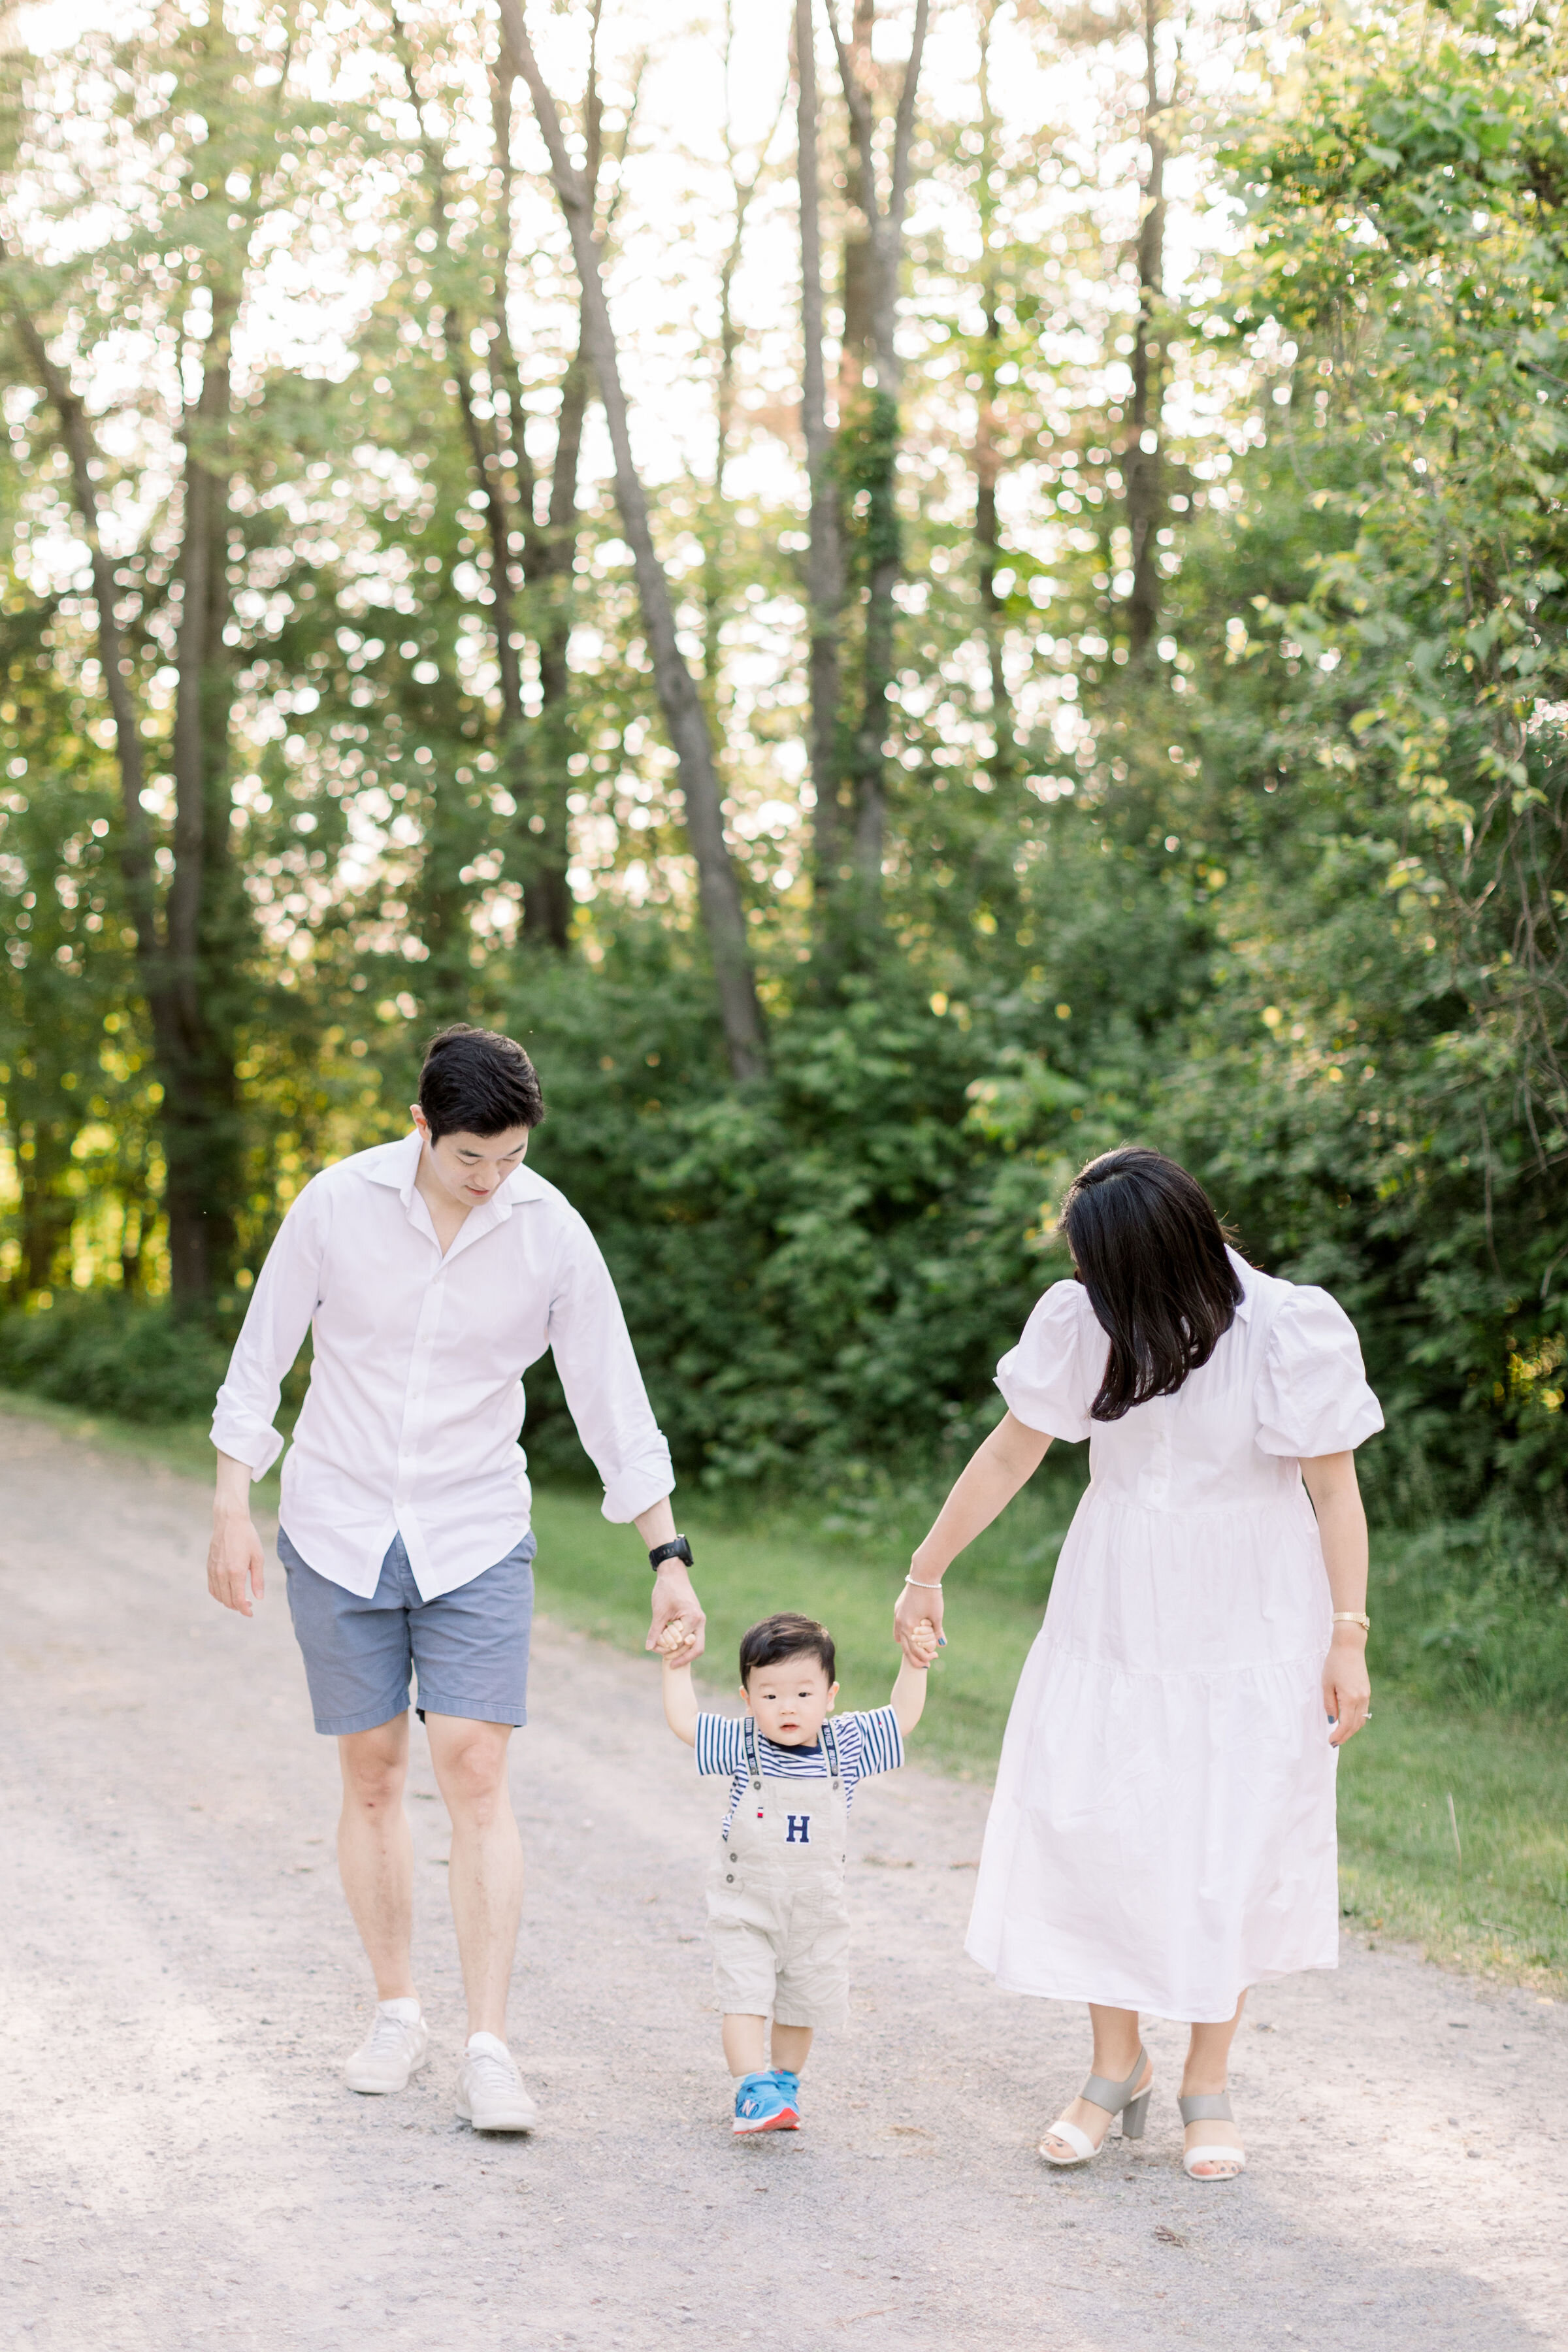  While walking down a wooded gravel pathway, Ottawa, Ontario family photographer, Chelsea Mason Photography captures these parents hold their toddler boy's hands. Ottawa family photographer white family photo outfit color toddler boy holding parents 